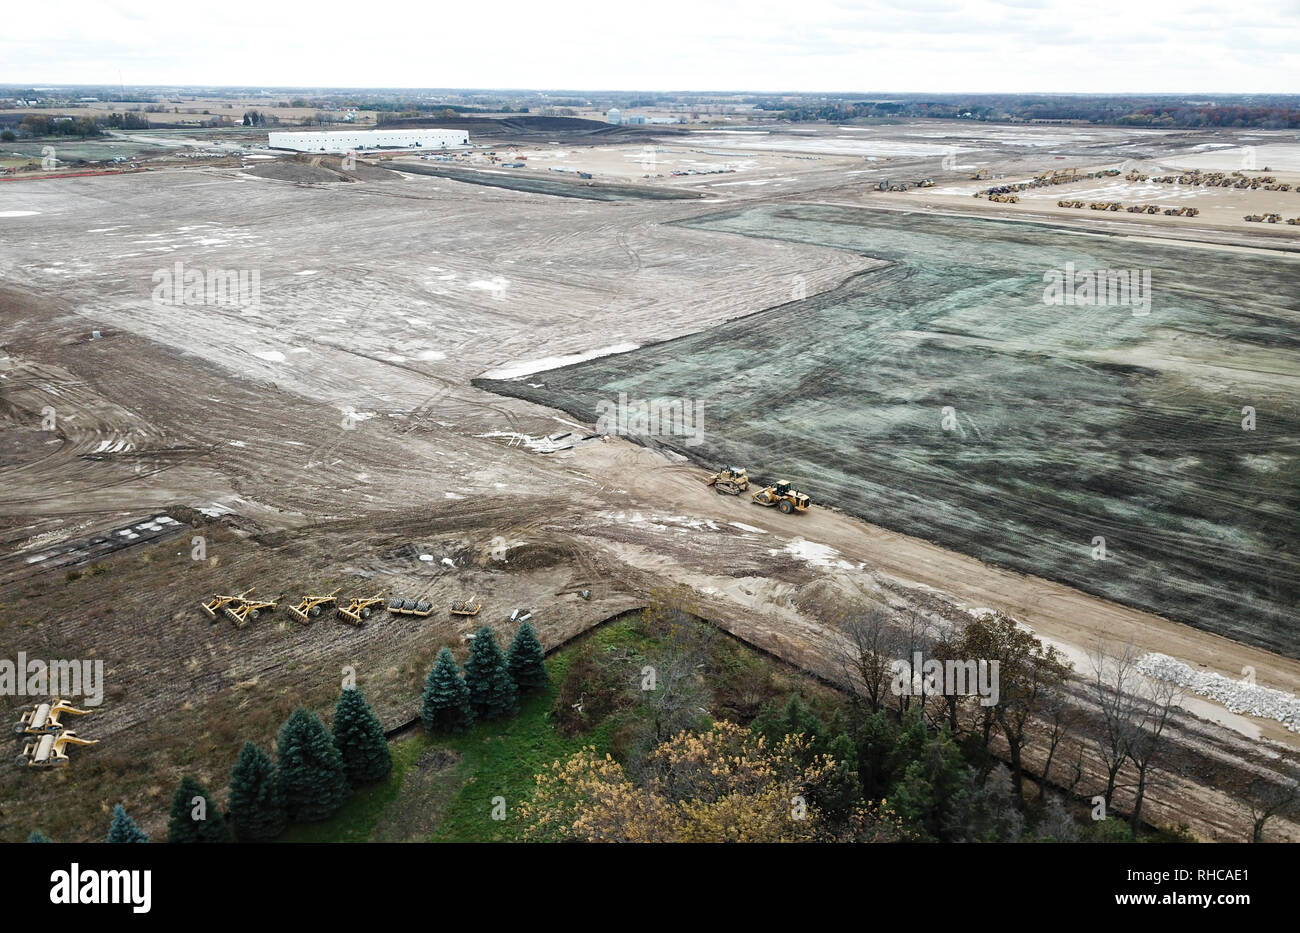 (190202) -- NEW YORK, Feb. 2, 2019 (Xinhua) -- The Foxconn's factory plant area is seen under construction at Mount Pleasant of Racine county, Wisconsin, the United States, Nov. 2, 2018. Residents' opposition, labor shortage, and technology transfer difficulties are the three main reasons why manufacturing companies like Foxconn could not move back to the United States easily, industry insiders and analysts have said. Being built on a vast 2,800 acres of land in the U.S. State of Wisconsin, the Foxconn plant project is dubbed by U.S. President Donald Trump as the 'eighth wonder of the wor Stock Photo